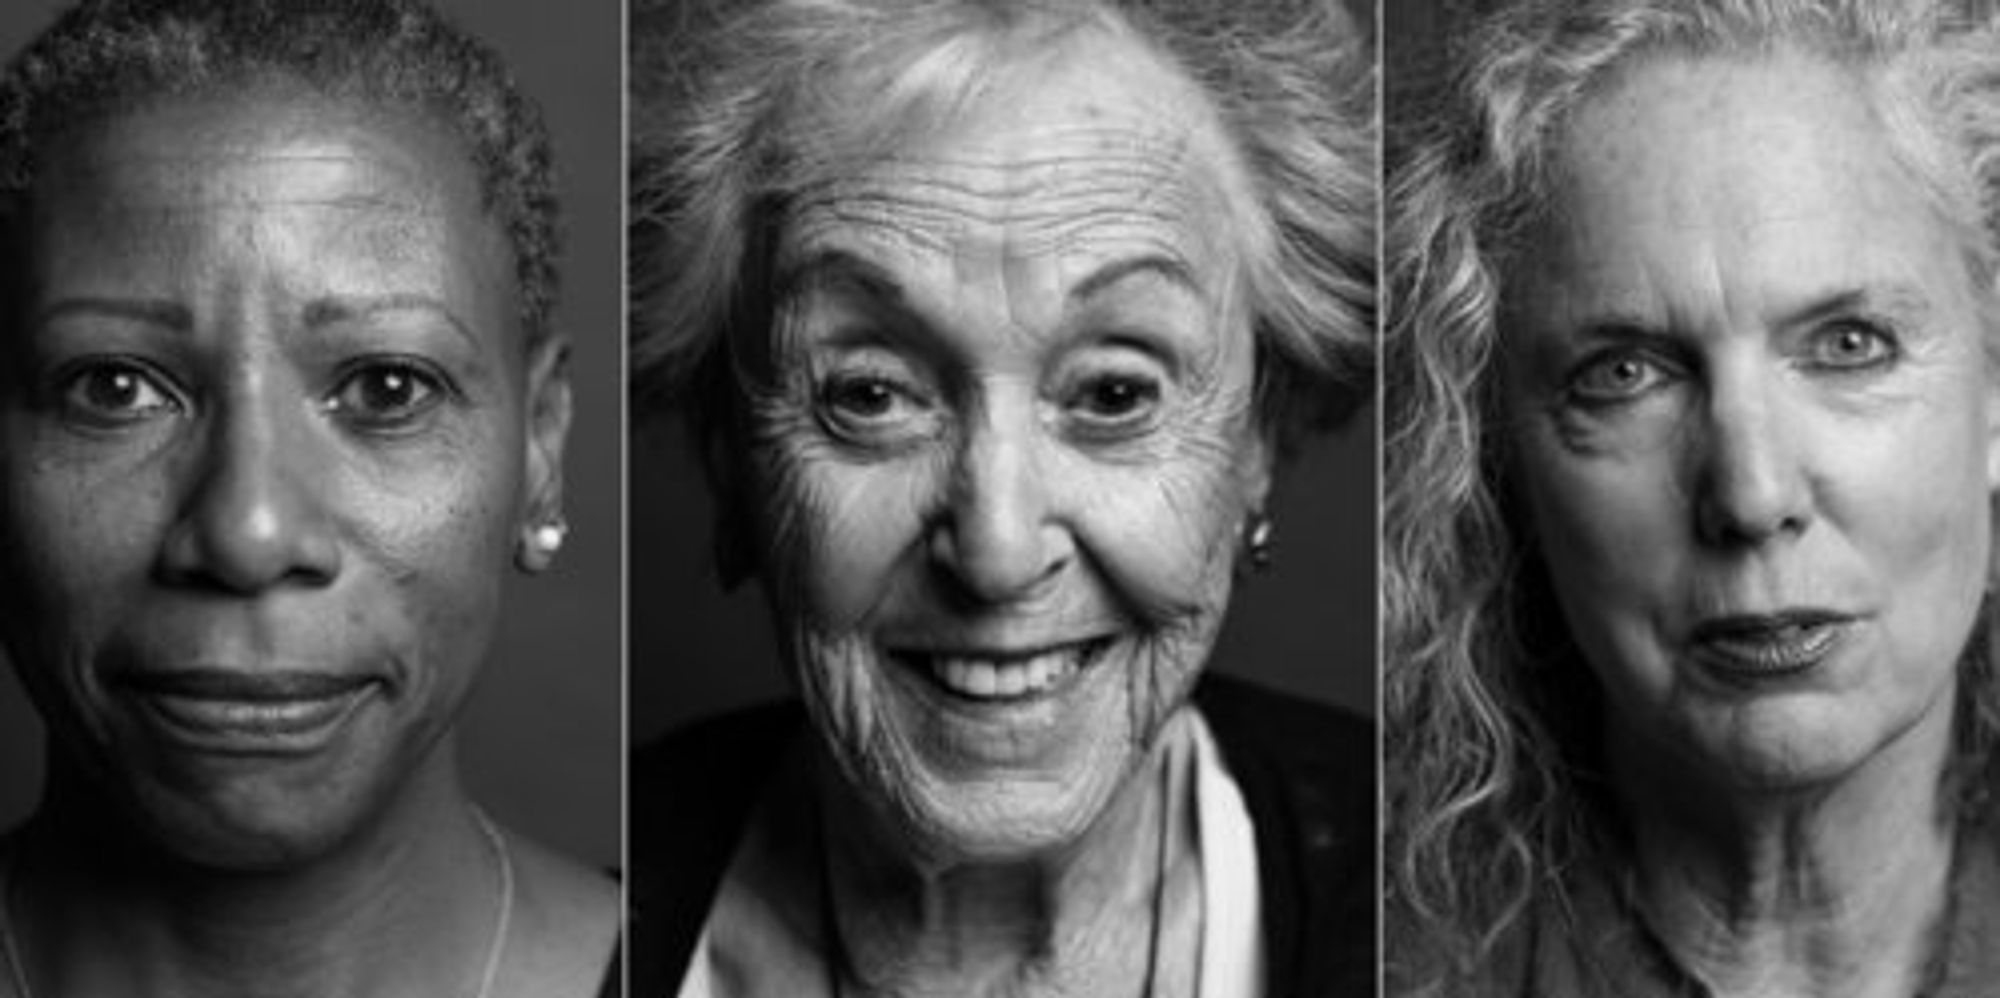 14 Women Show Off Wrinkles To Make A Potent Statement About Aging The